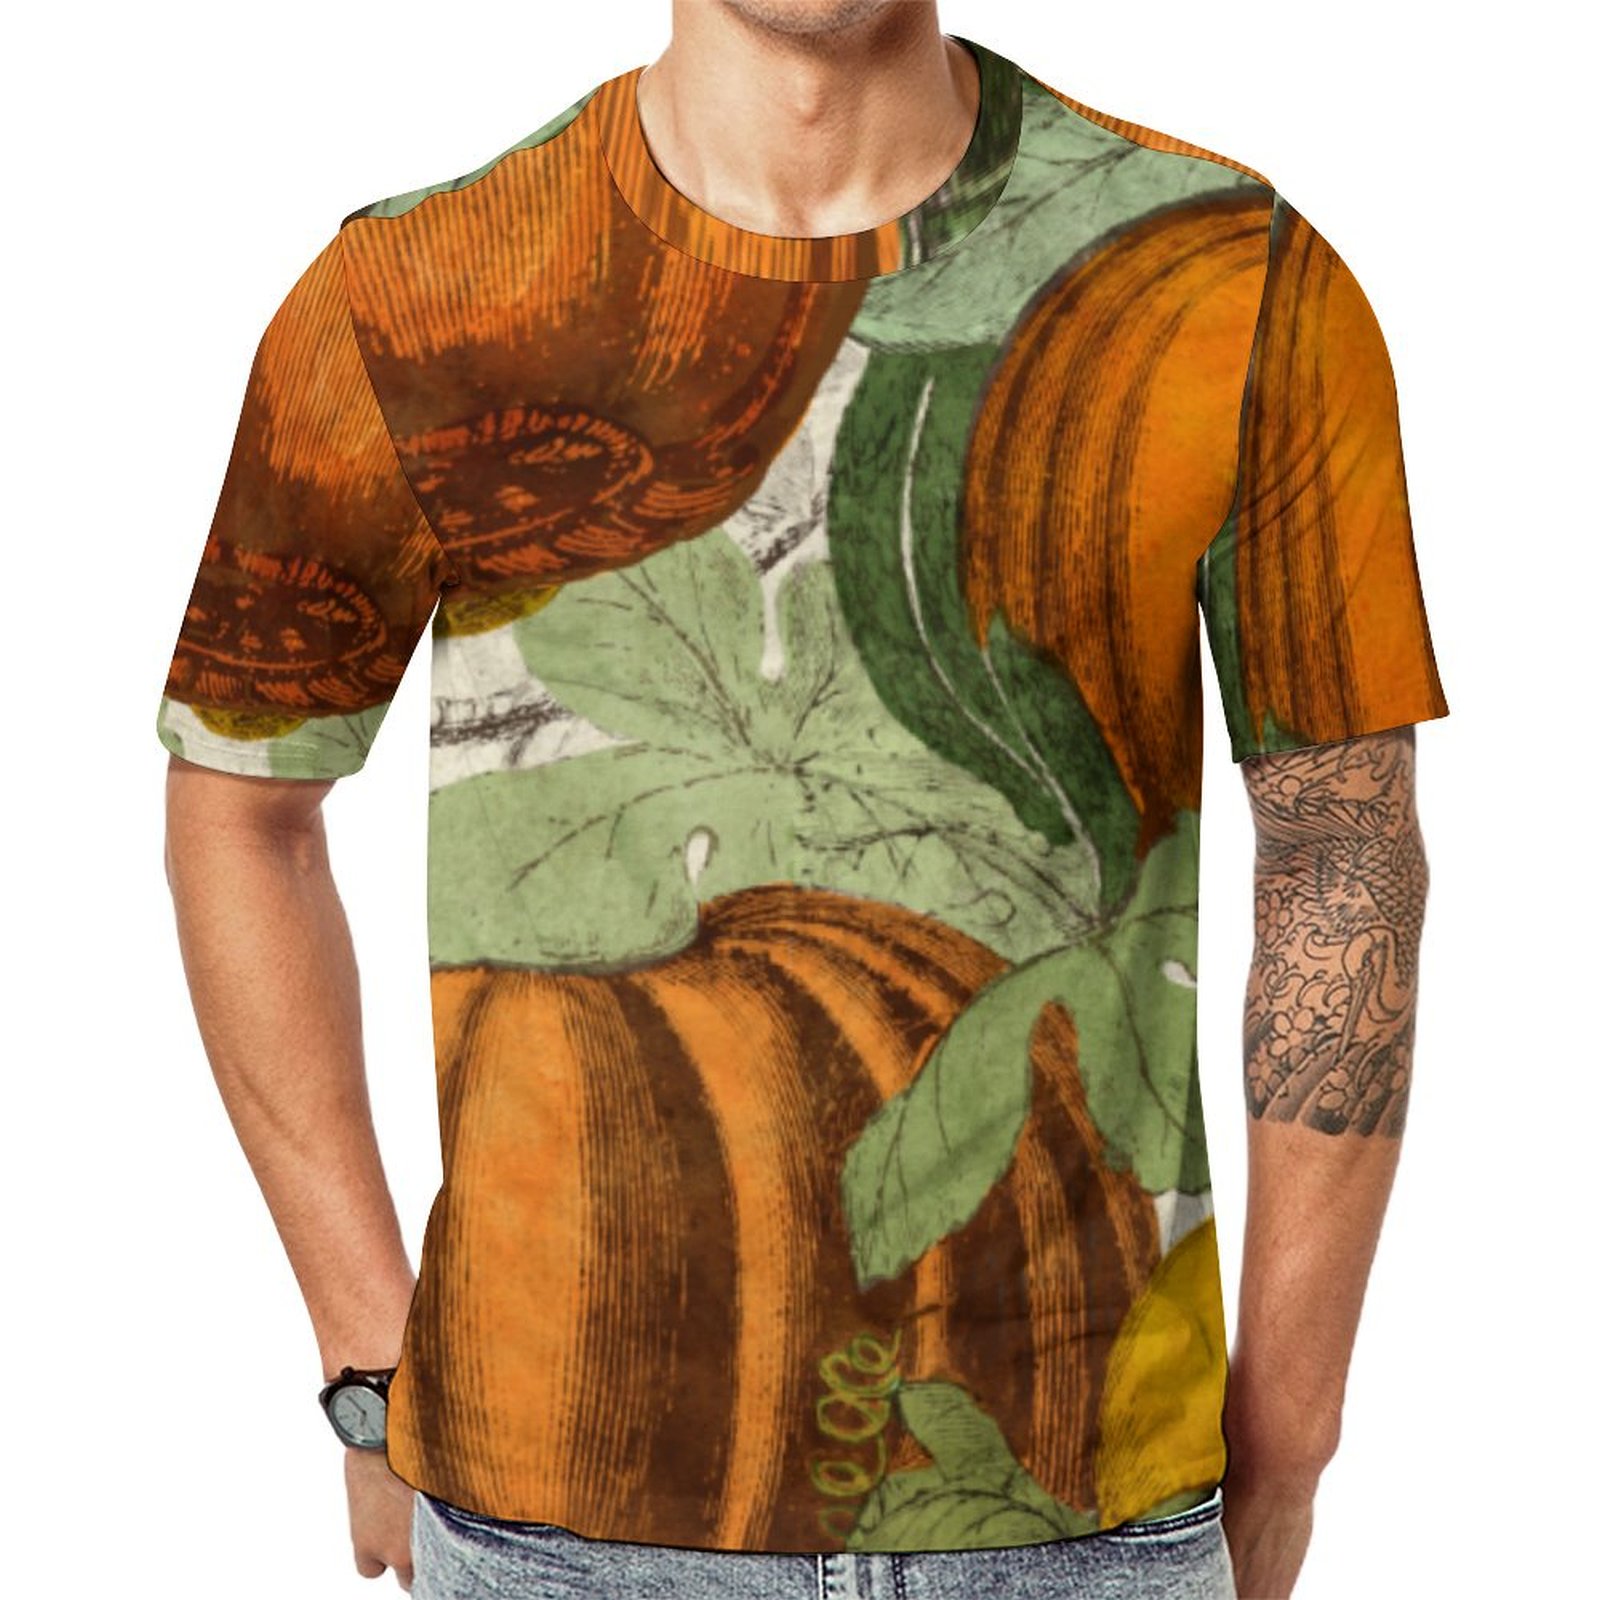 Vintage Pumpkins And Gourds Short Sleeve Print Unisex Tshirt Summer Casual Tees for Men and Women Coolcoshirts